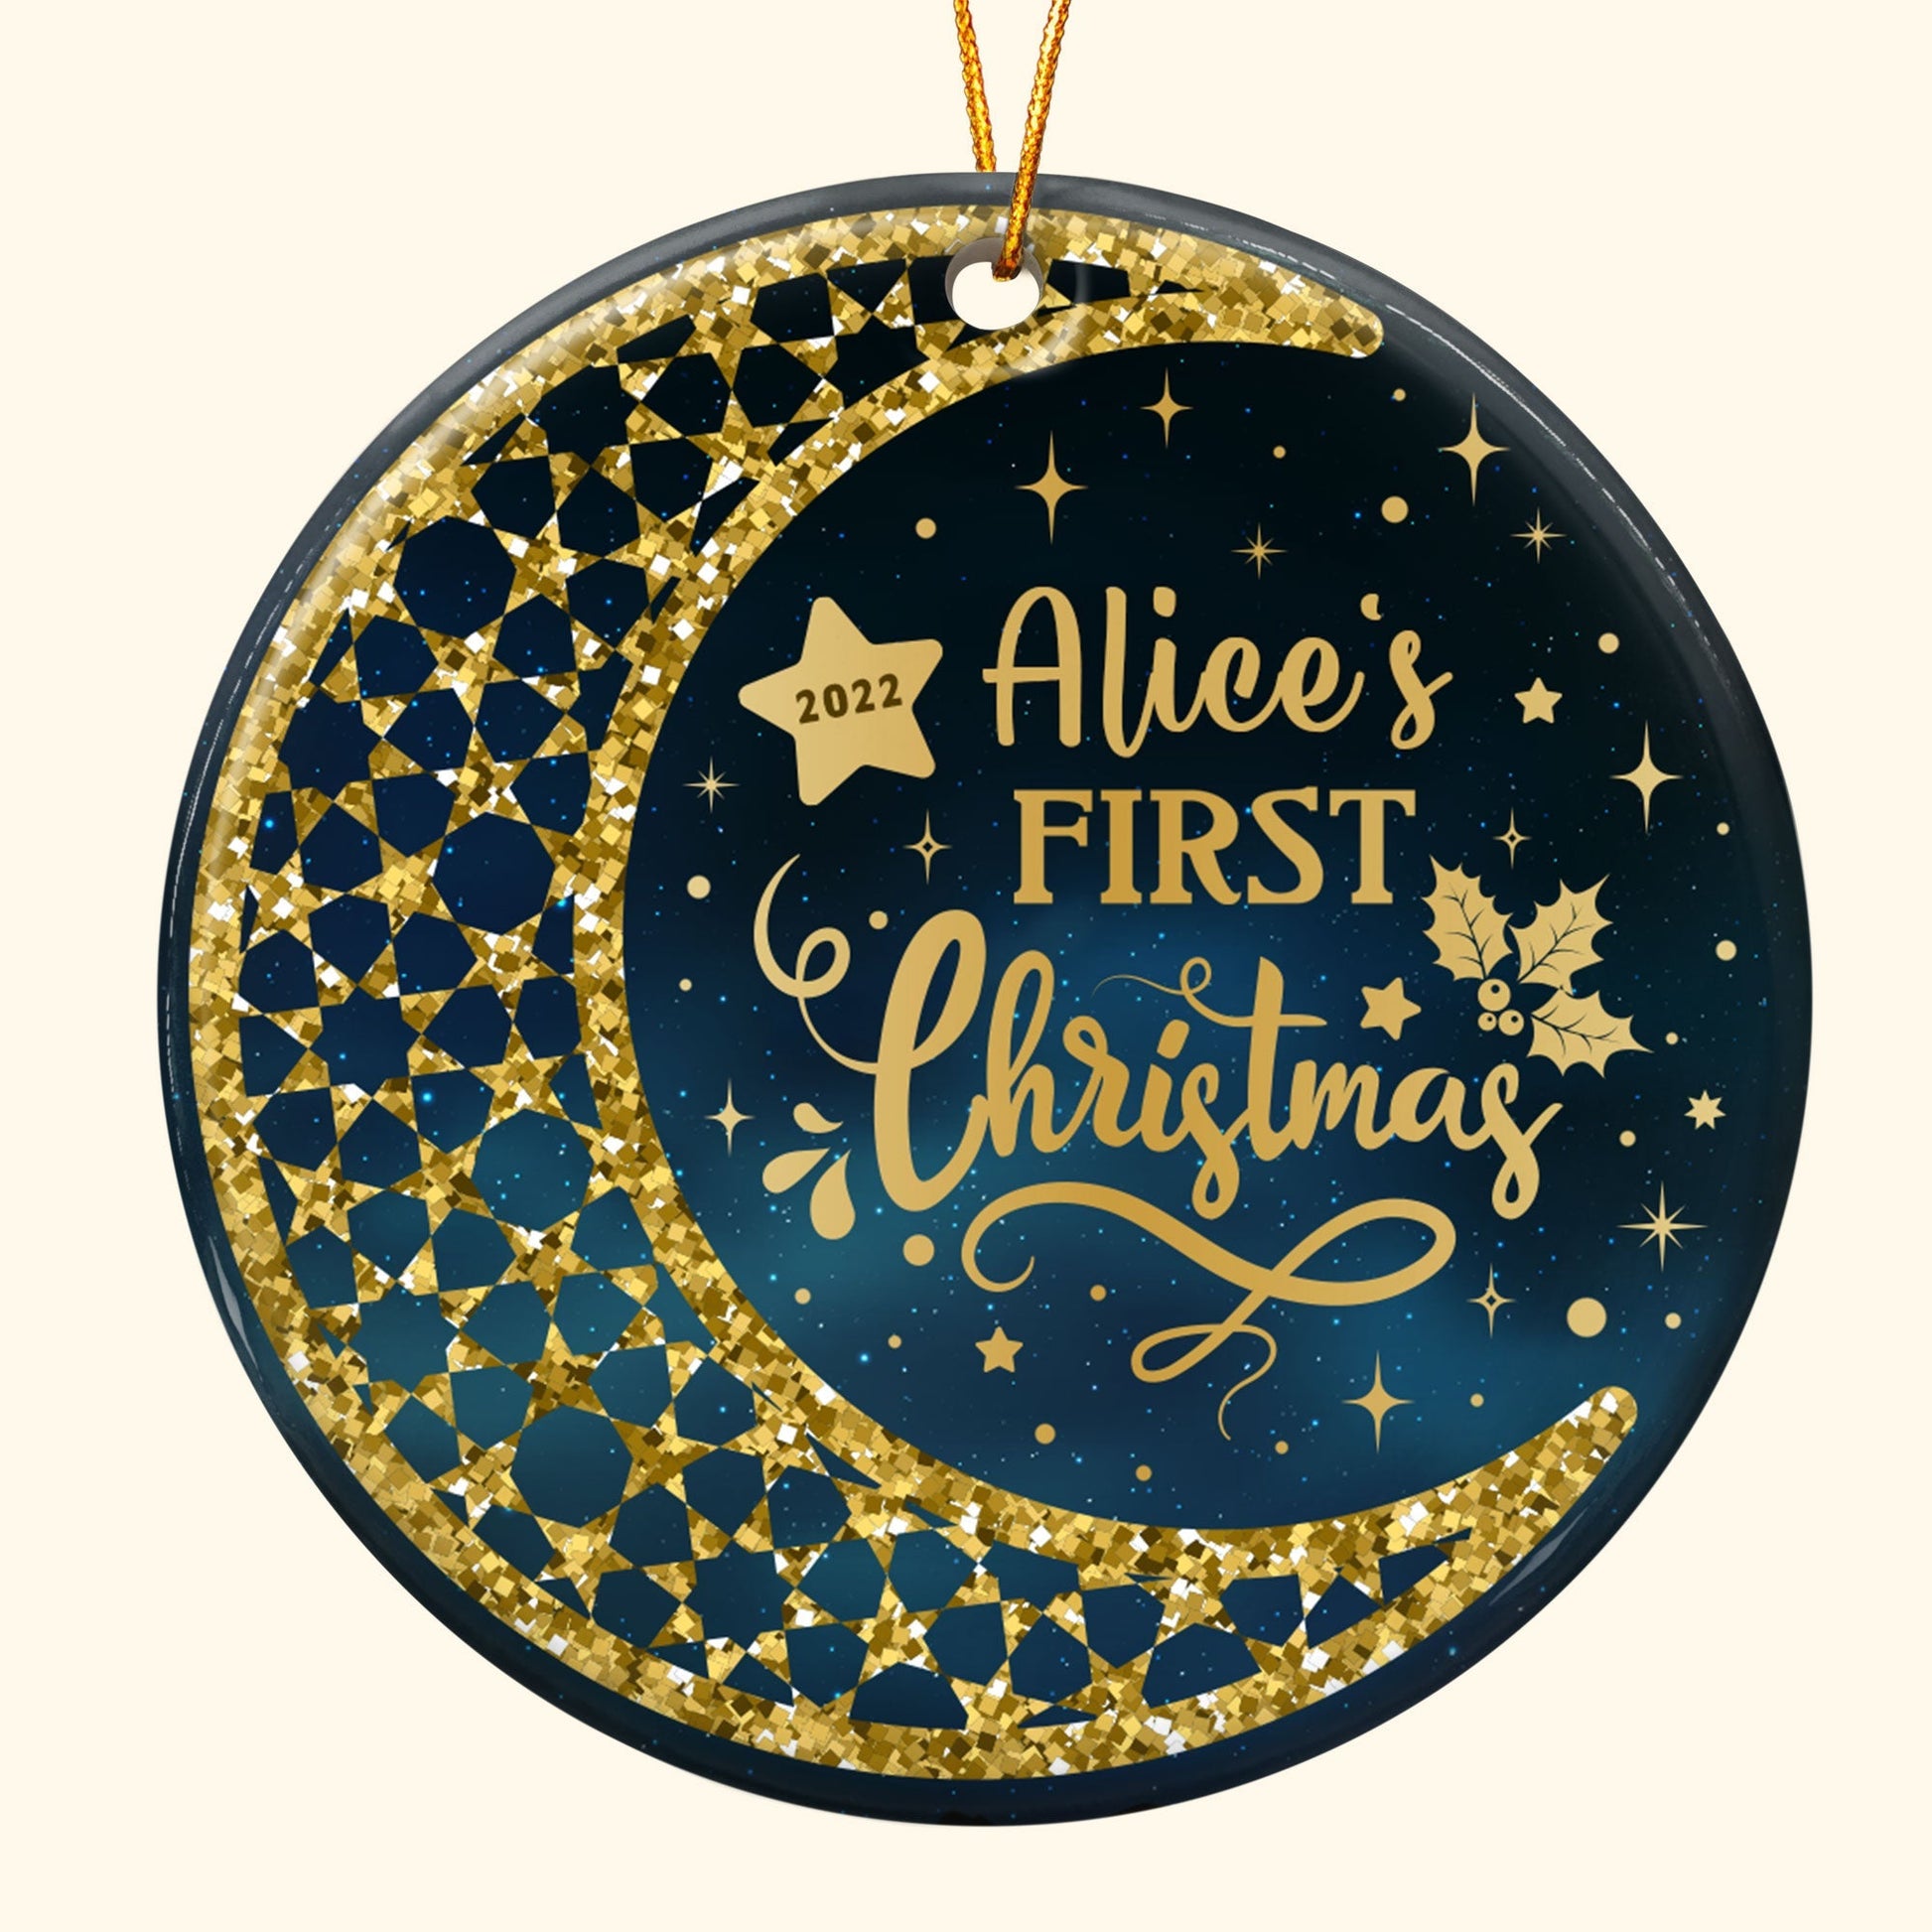 Baby's First Christmas - Personalized Ceramic Ornament - Christmas, Loving Gift For Couple, Husband, Wife, Family, Kids